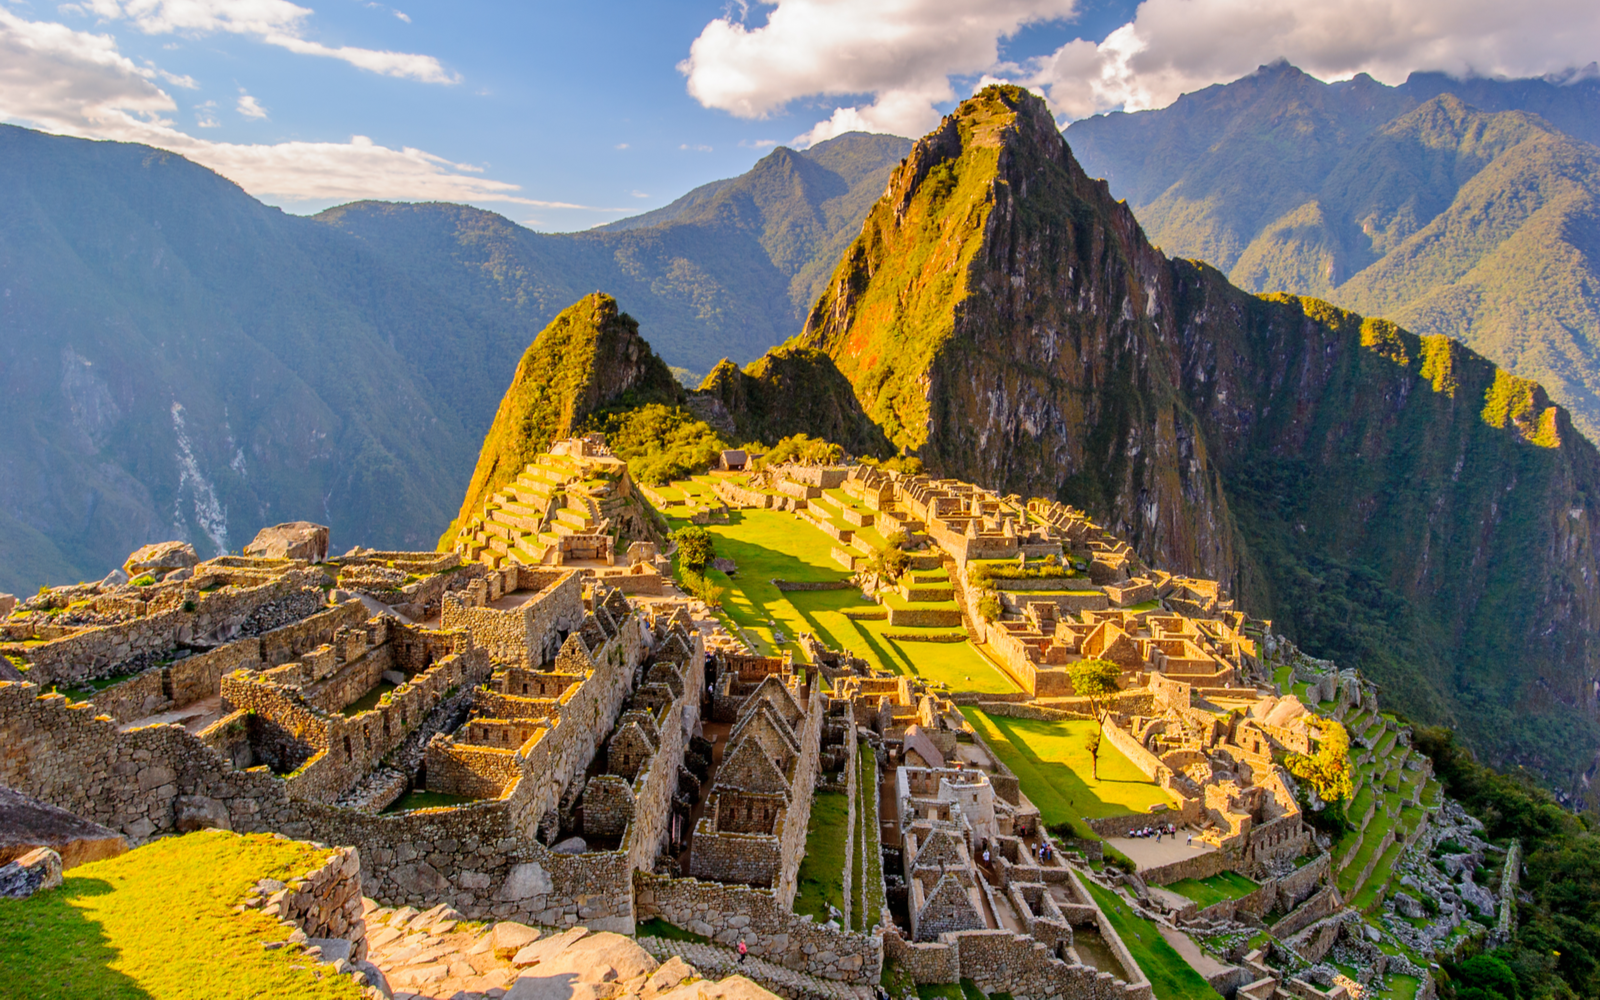 Hilltop ruins in Peru pictured during the best time to visit Machu Picchu with clouds overhead and warm weather